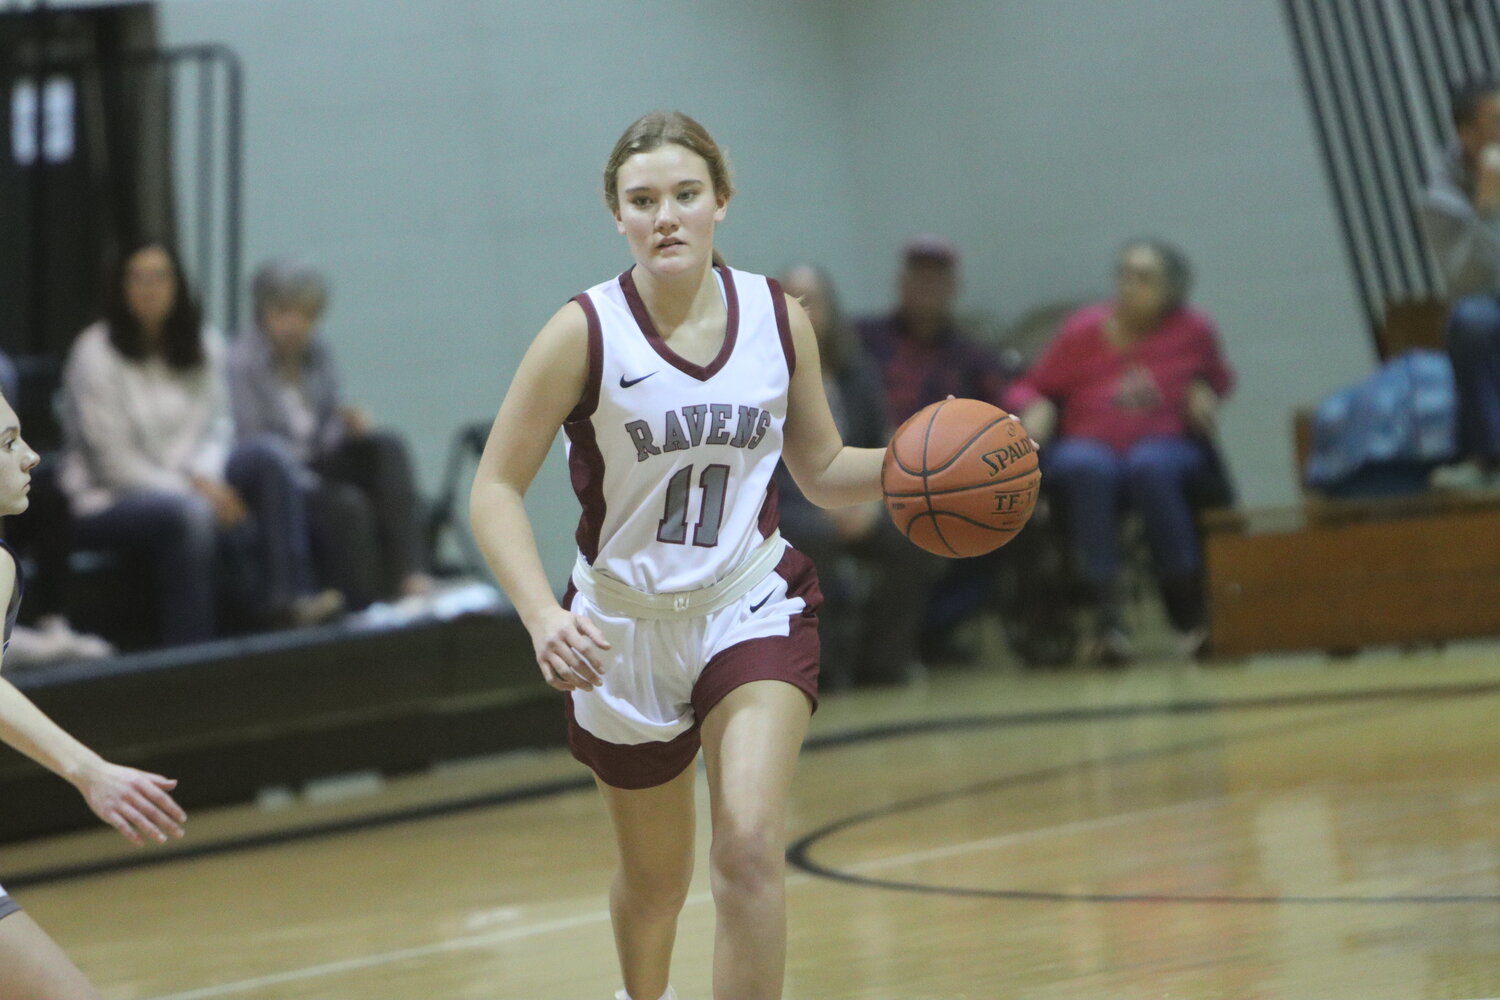 Hillcrest's Claire Withrow leads the Ravens with 286 points through 20 games.